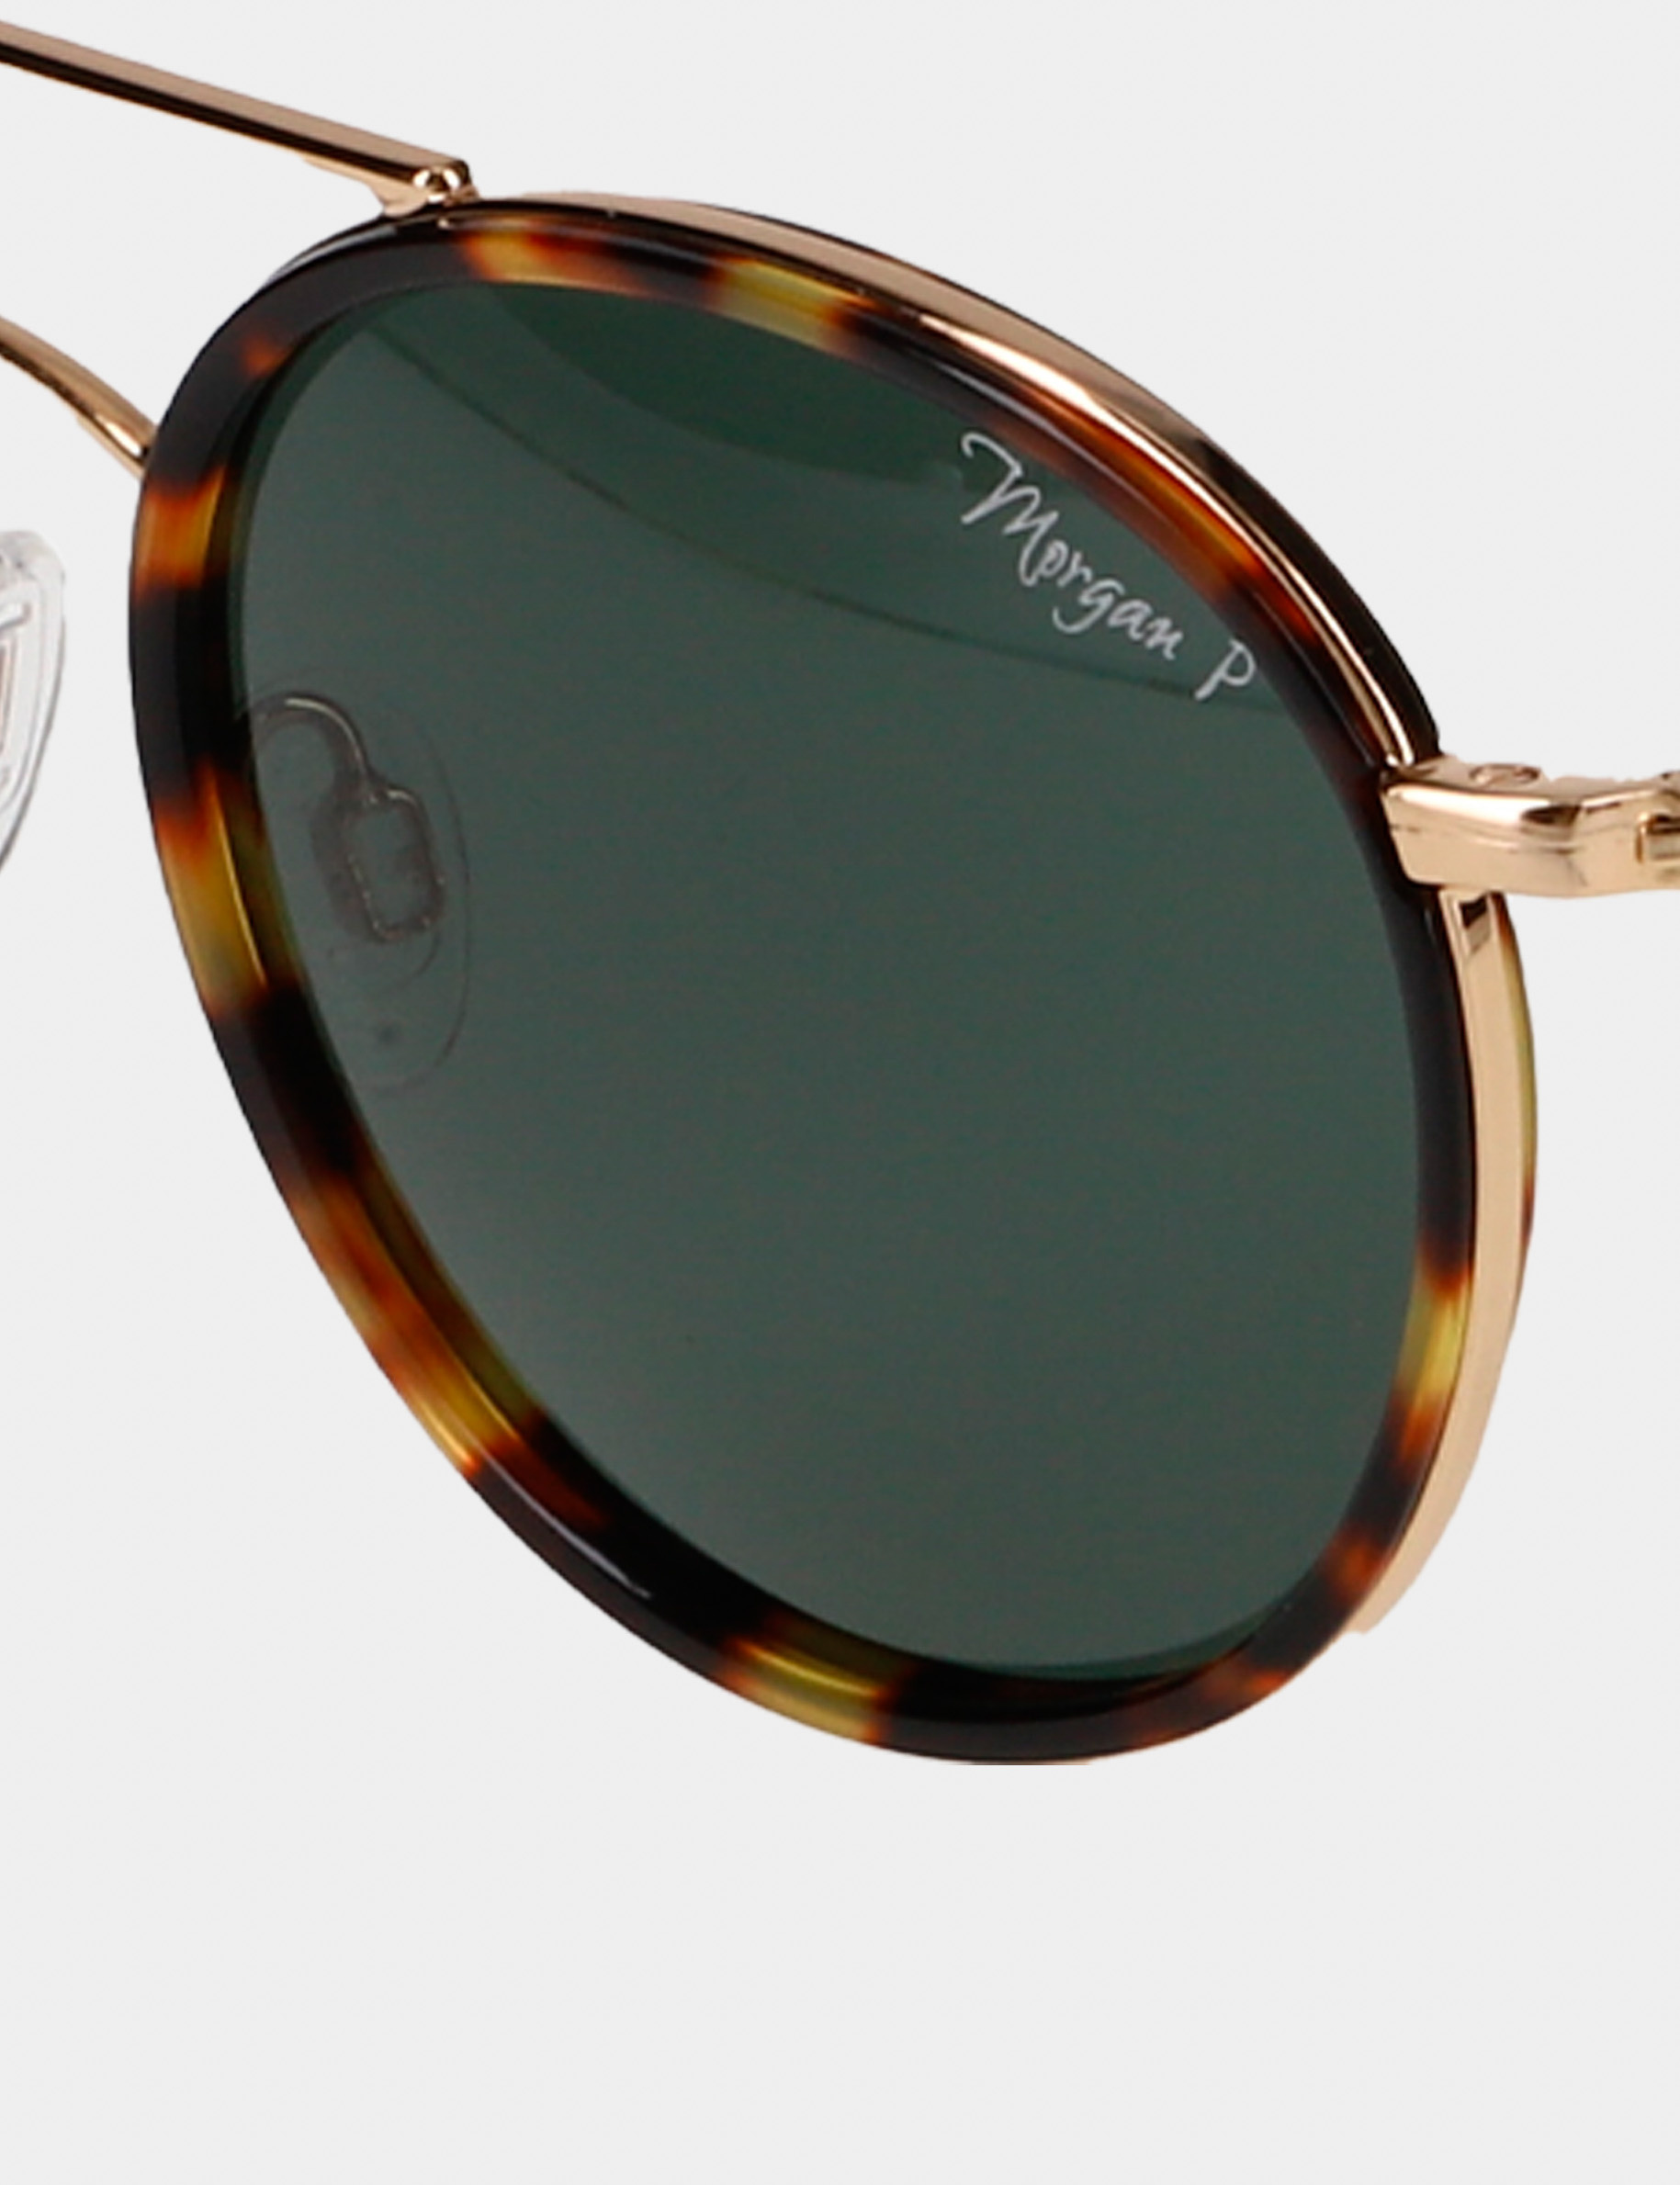 Round sunglasses with brow bar gold ladies'